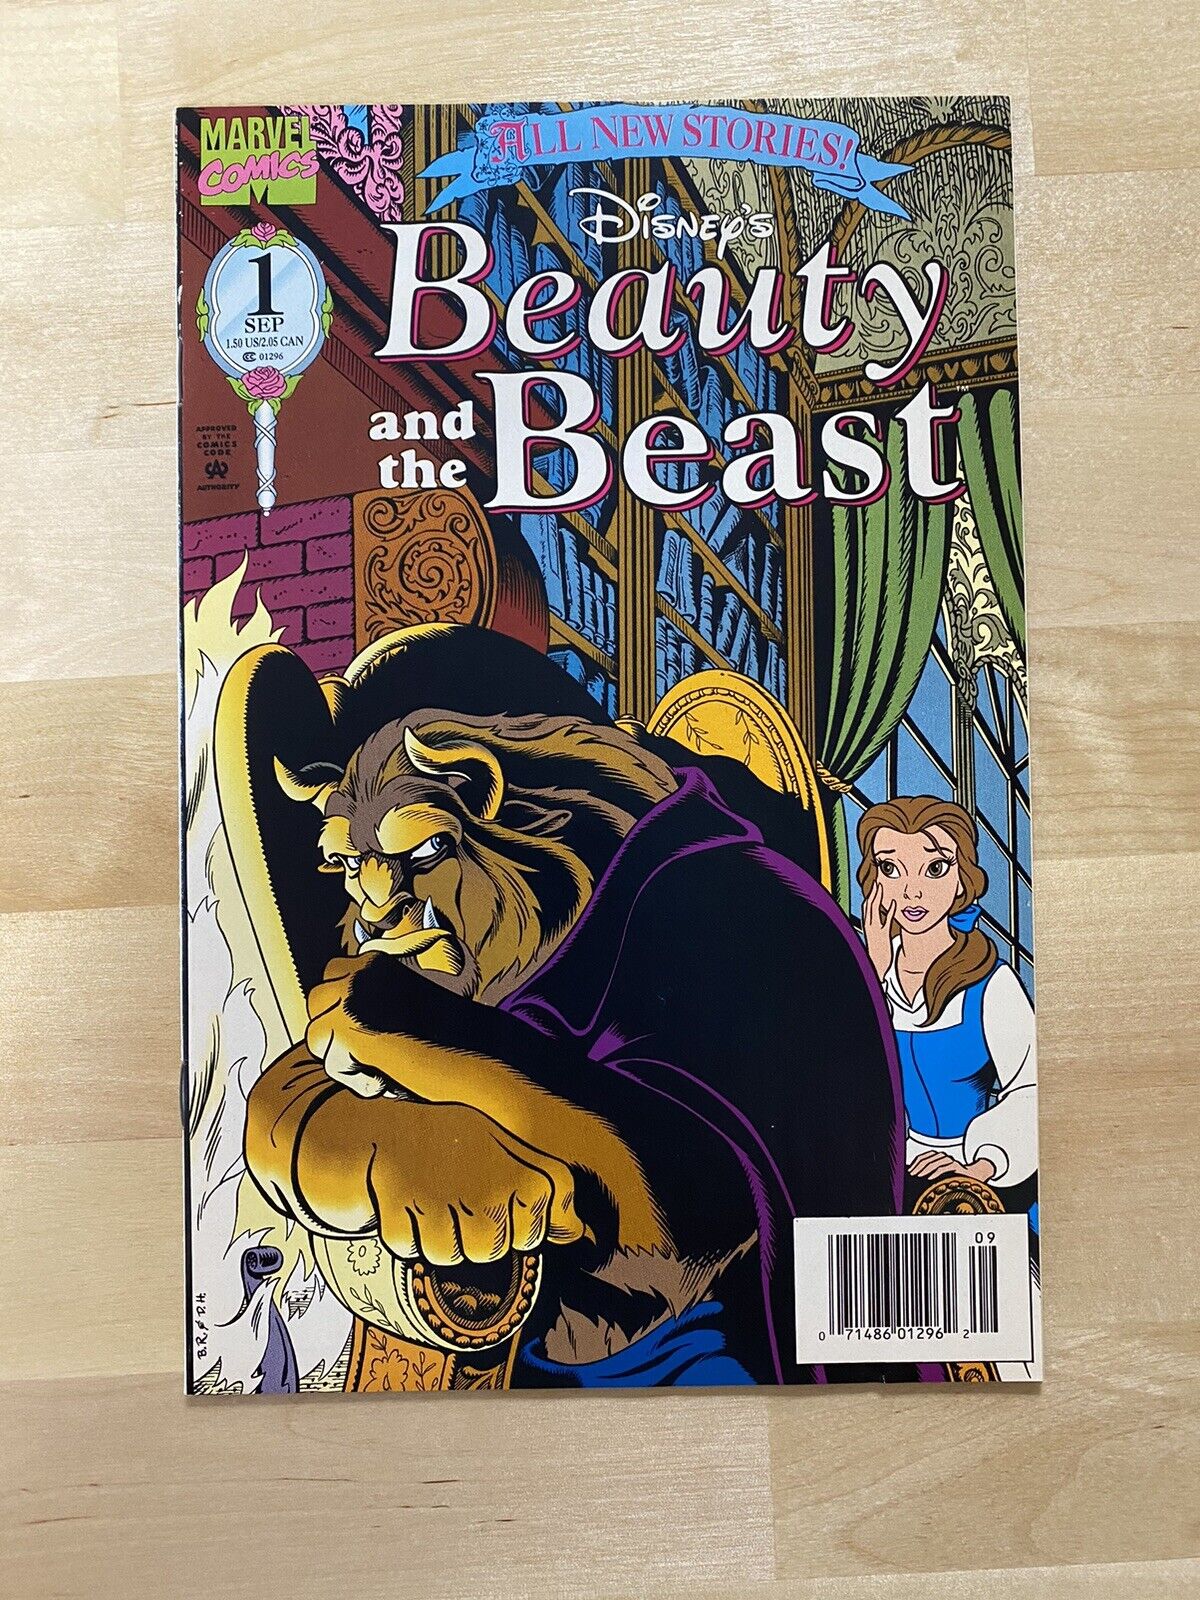 Disney’s Beauty and the Beast Marvel Comics (8 Issues)